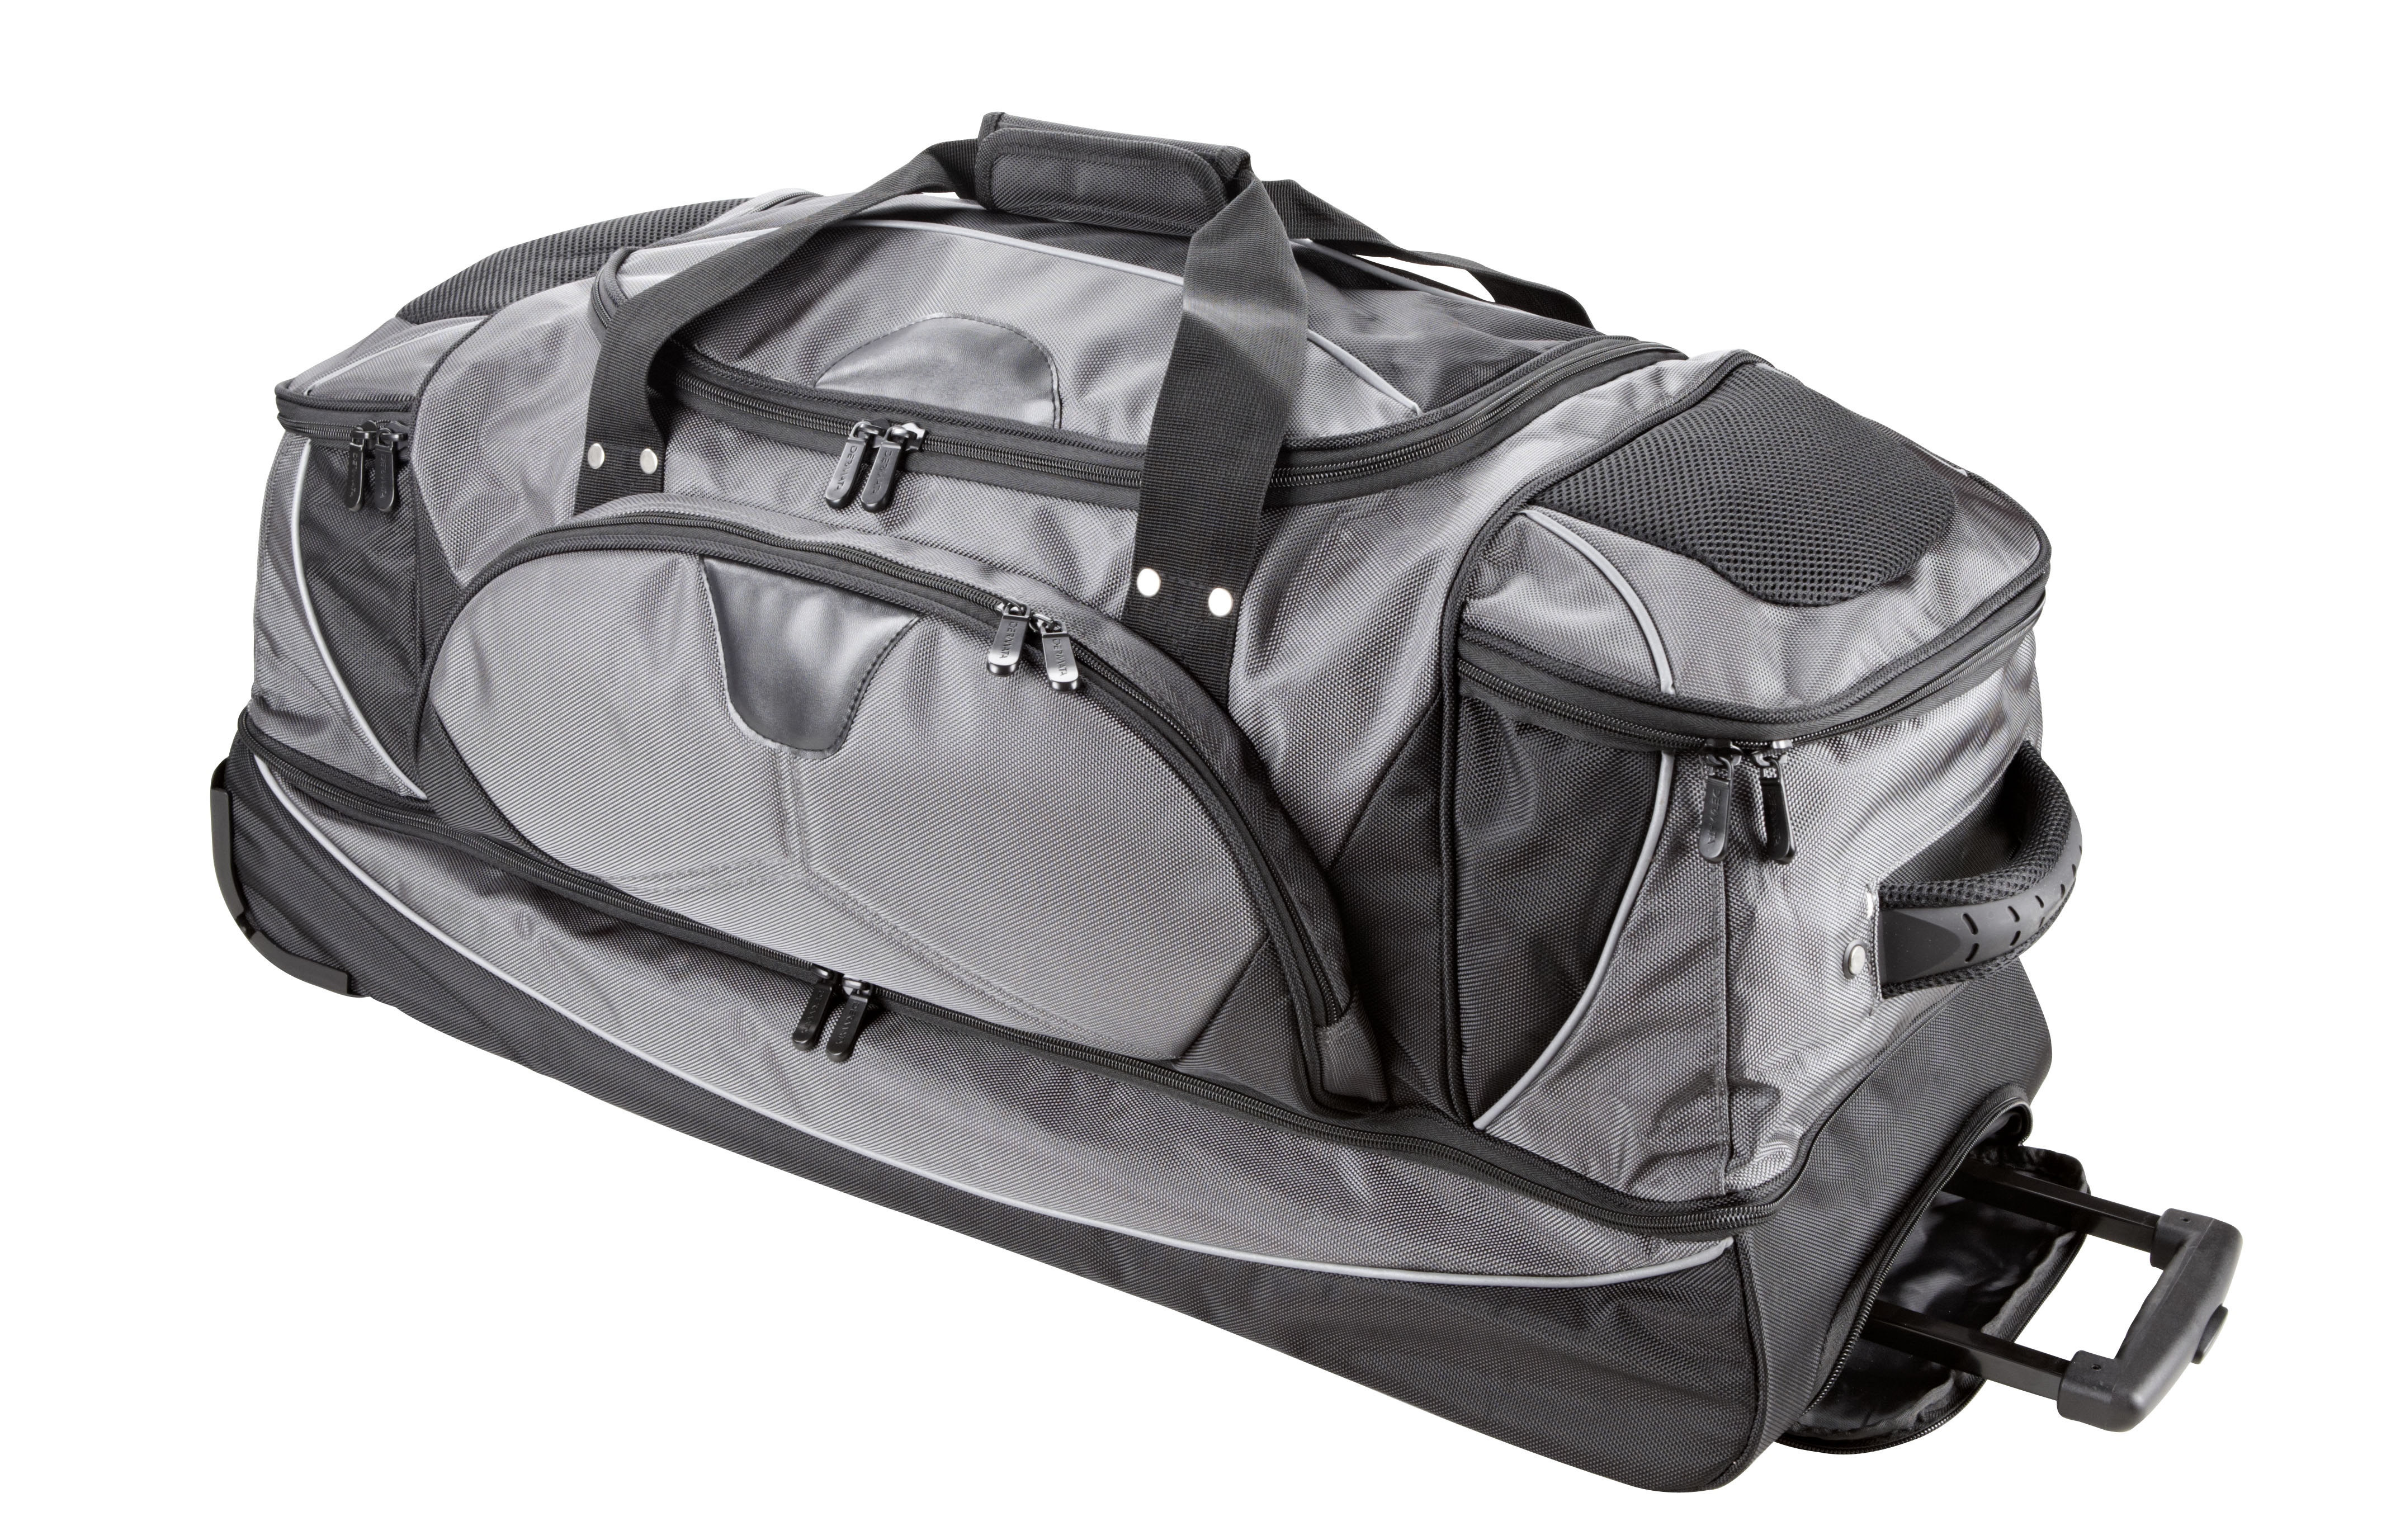 Wheeled Duffle Travel Bag - Large Rolling Lightweight Luggage Bags for Men